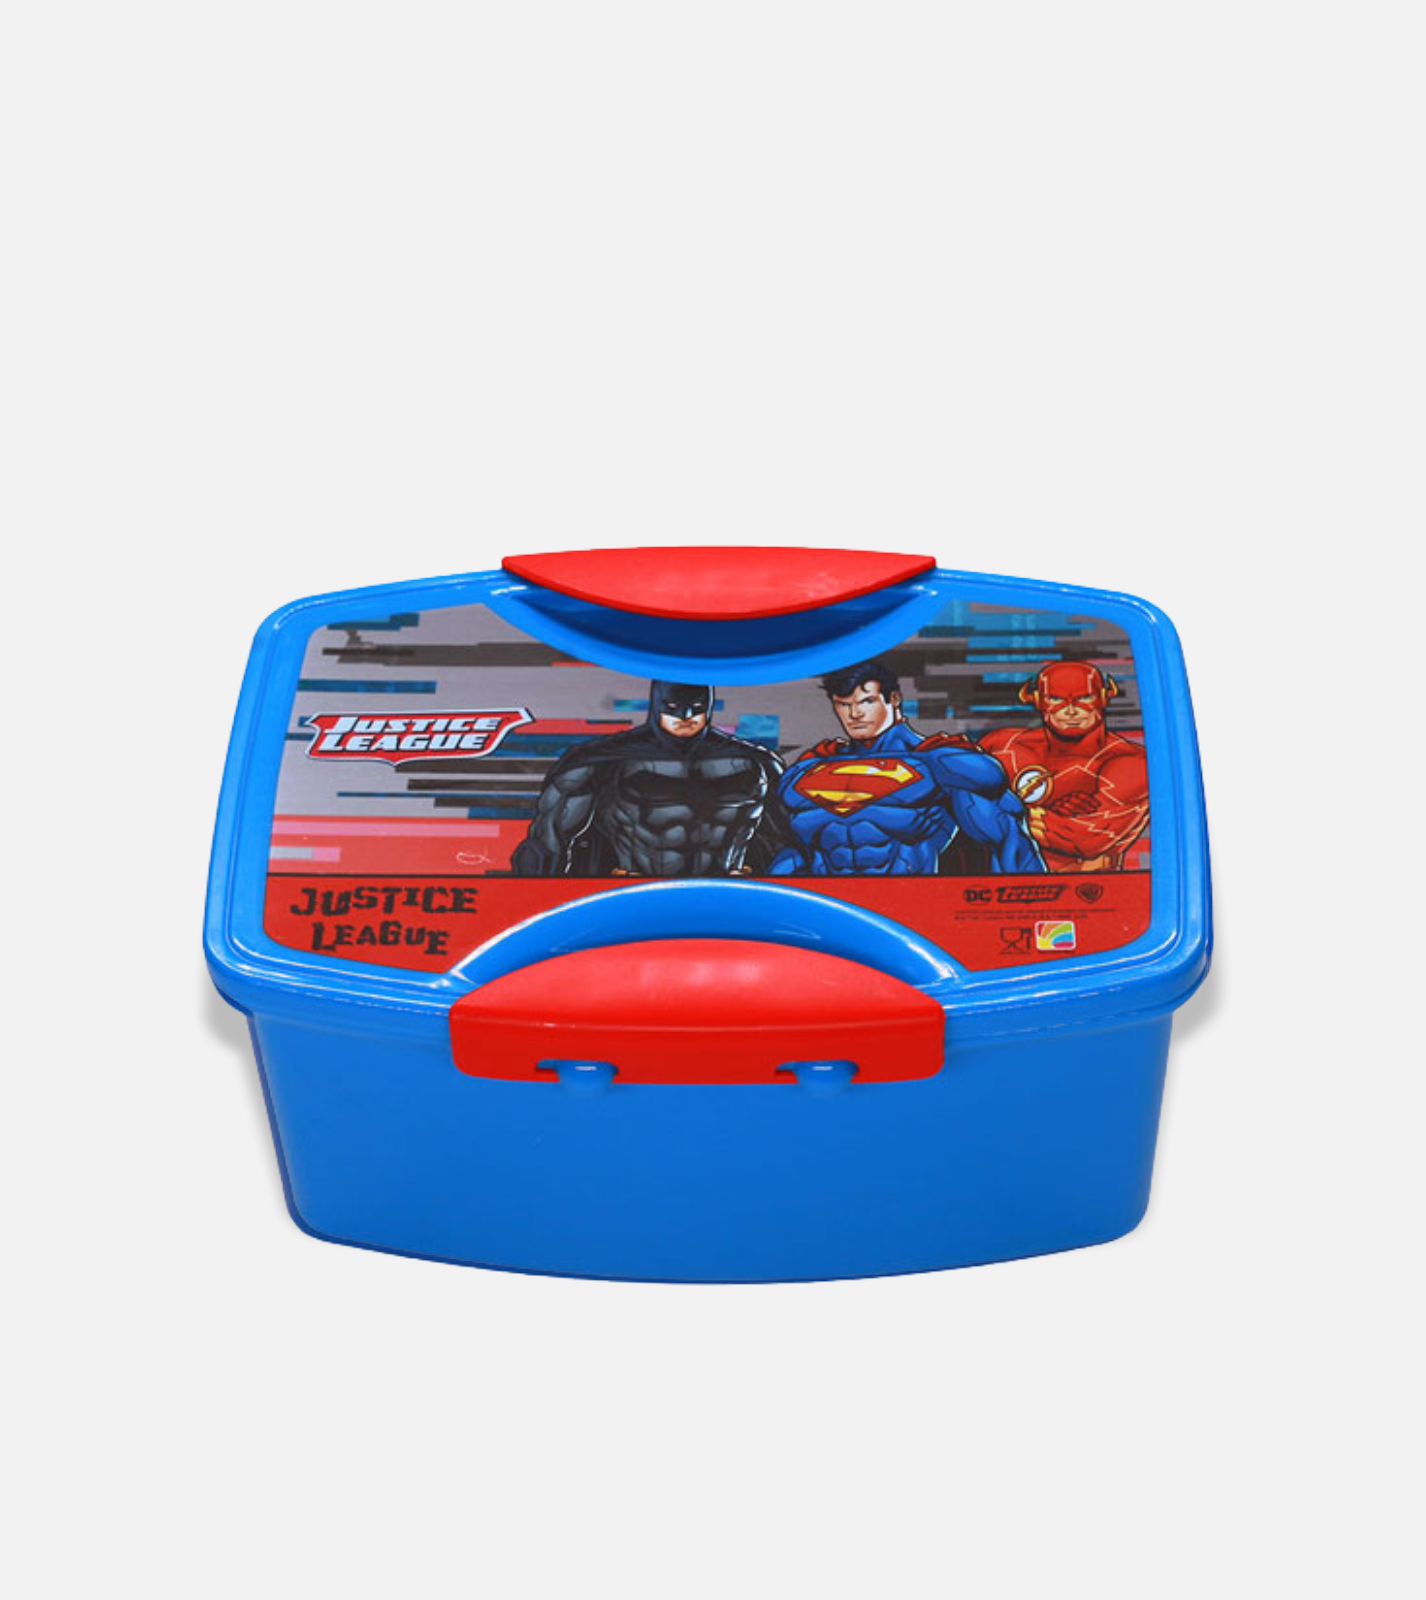 Justice league - box lunch with plastic spoon & fork